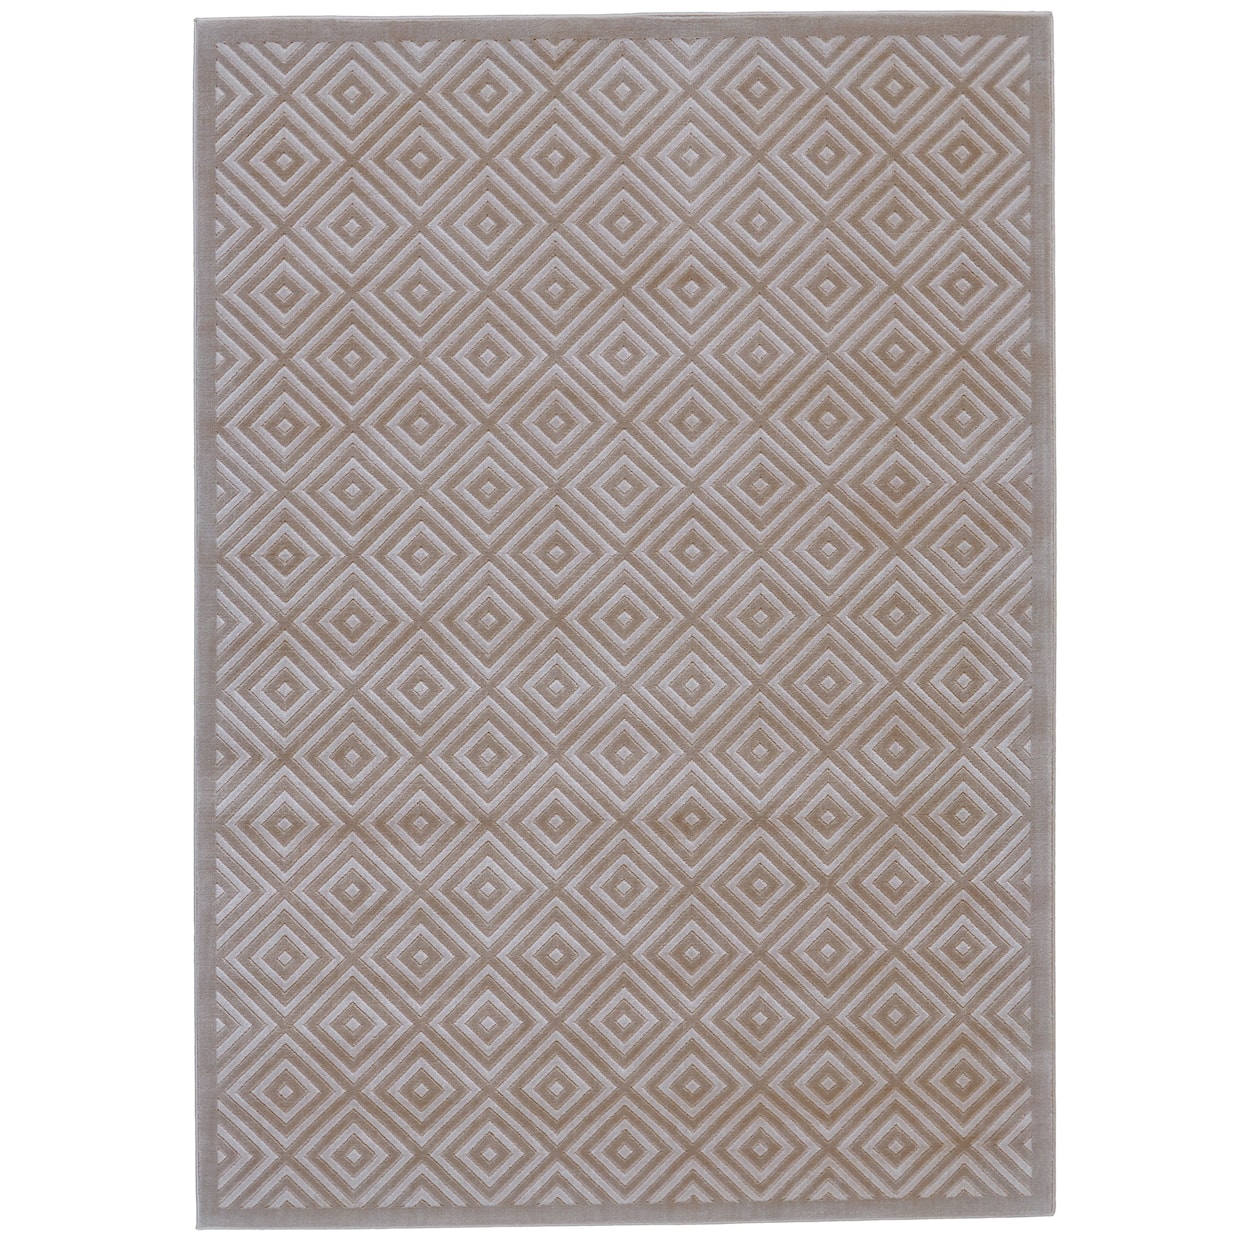 Feizy Rugs Melina Birch/Taupe 5' x 8' Area Rug